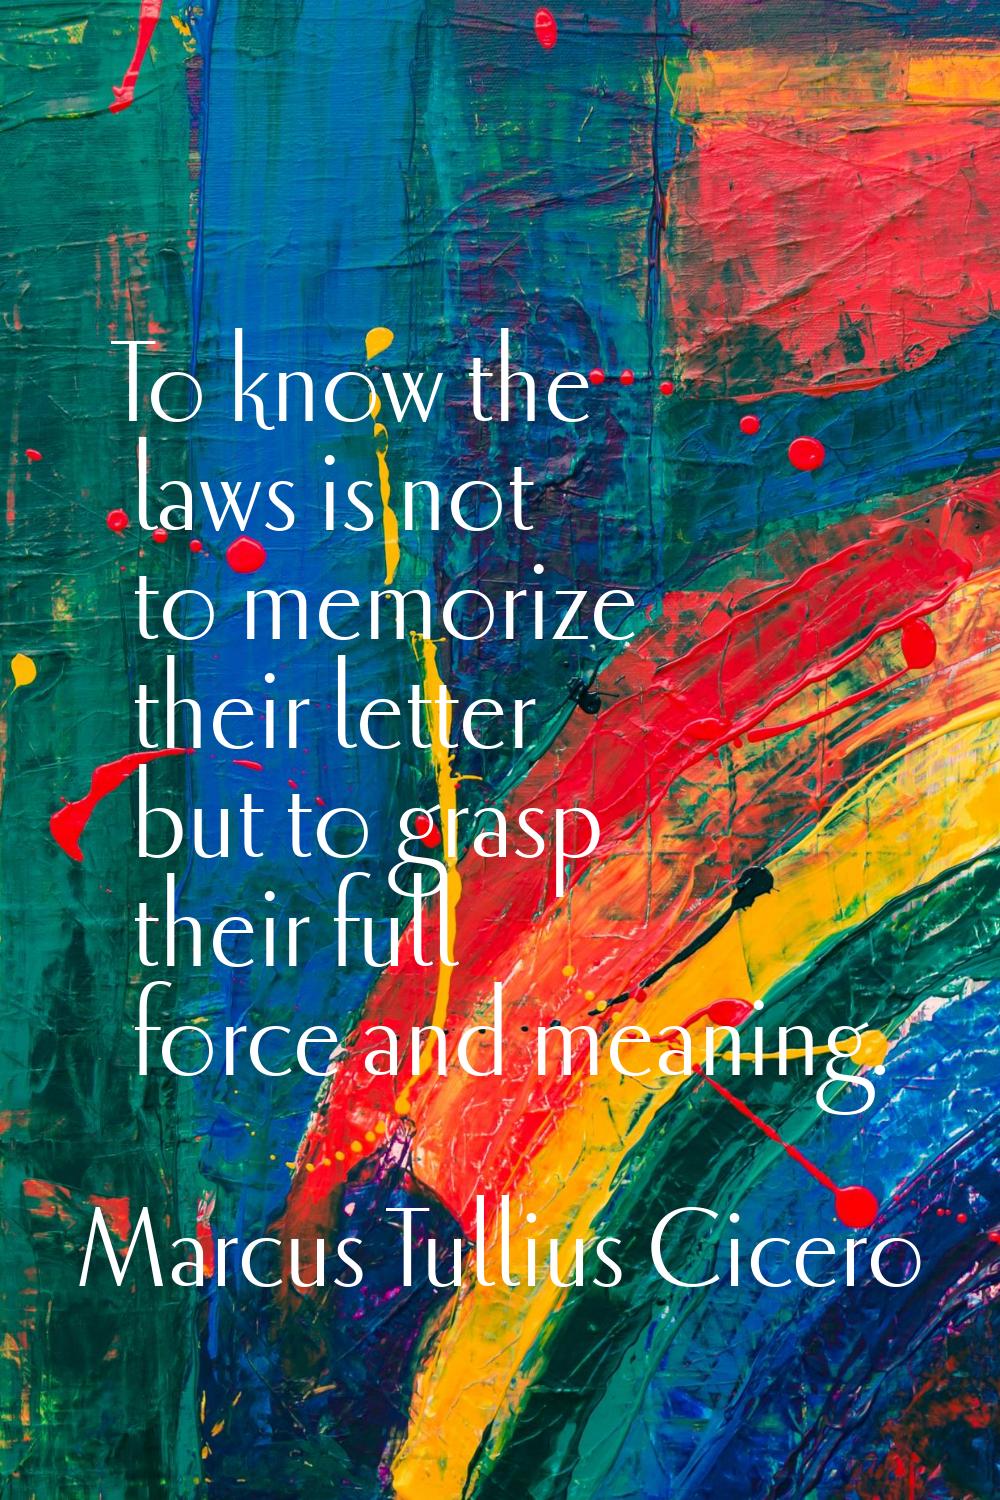 To know the laws is not to memorize their letter but to grasp their full force and meaning.